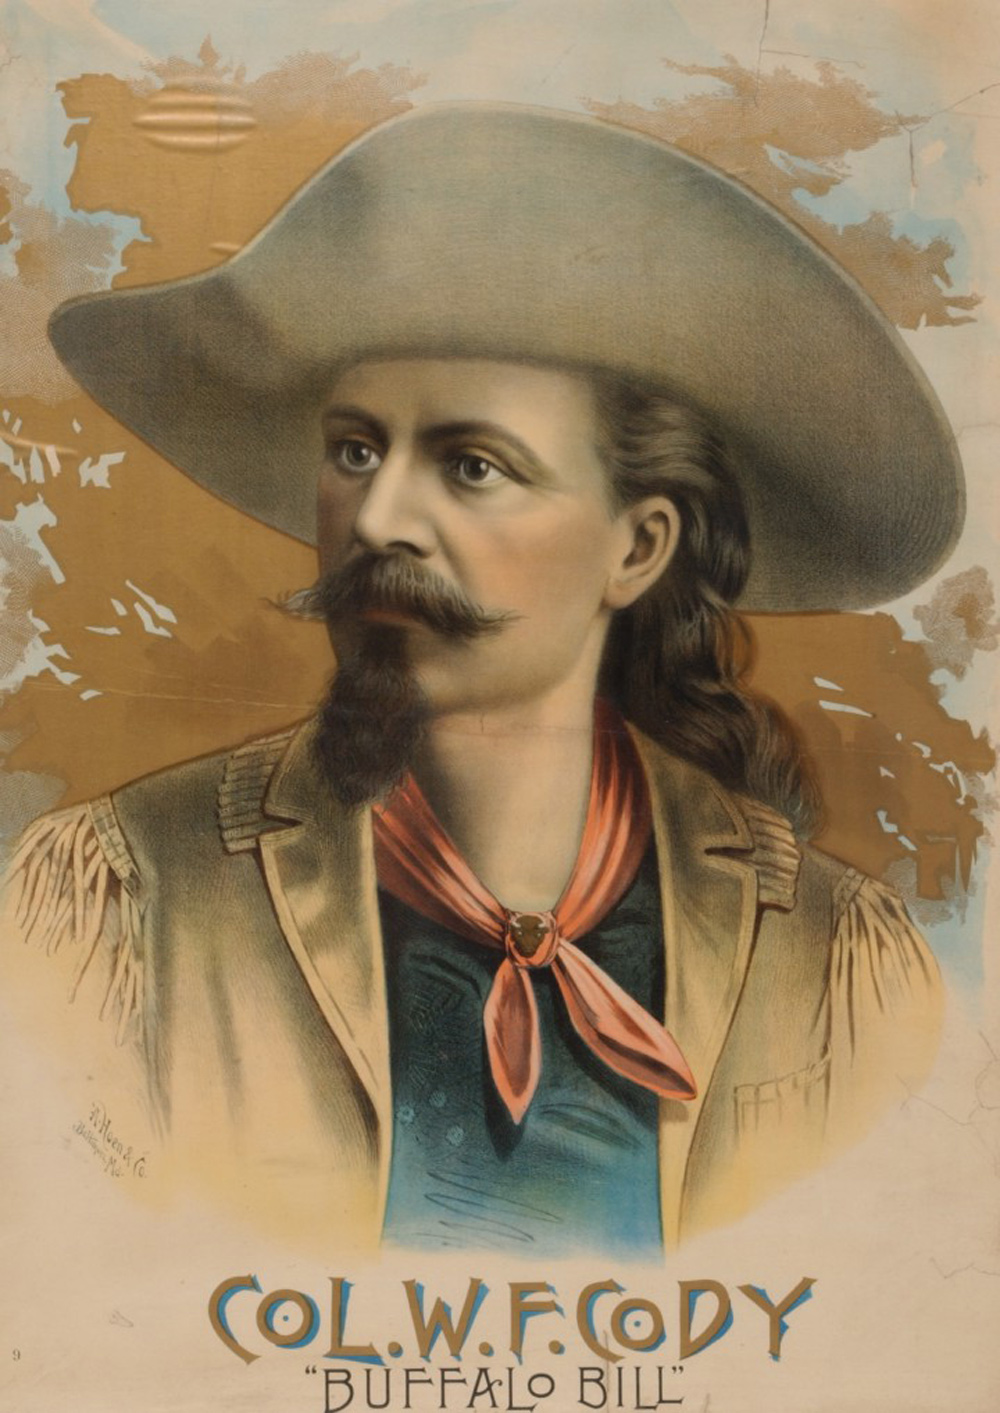 Buffalo Bill's Wild West Show Poster, Images